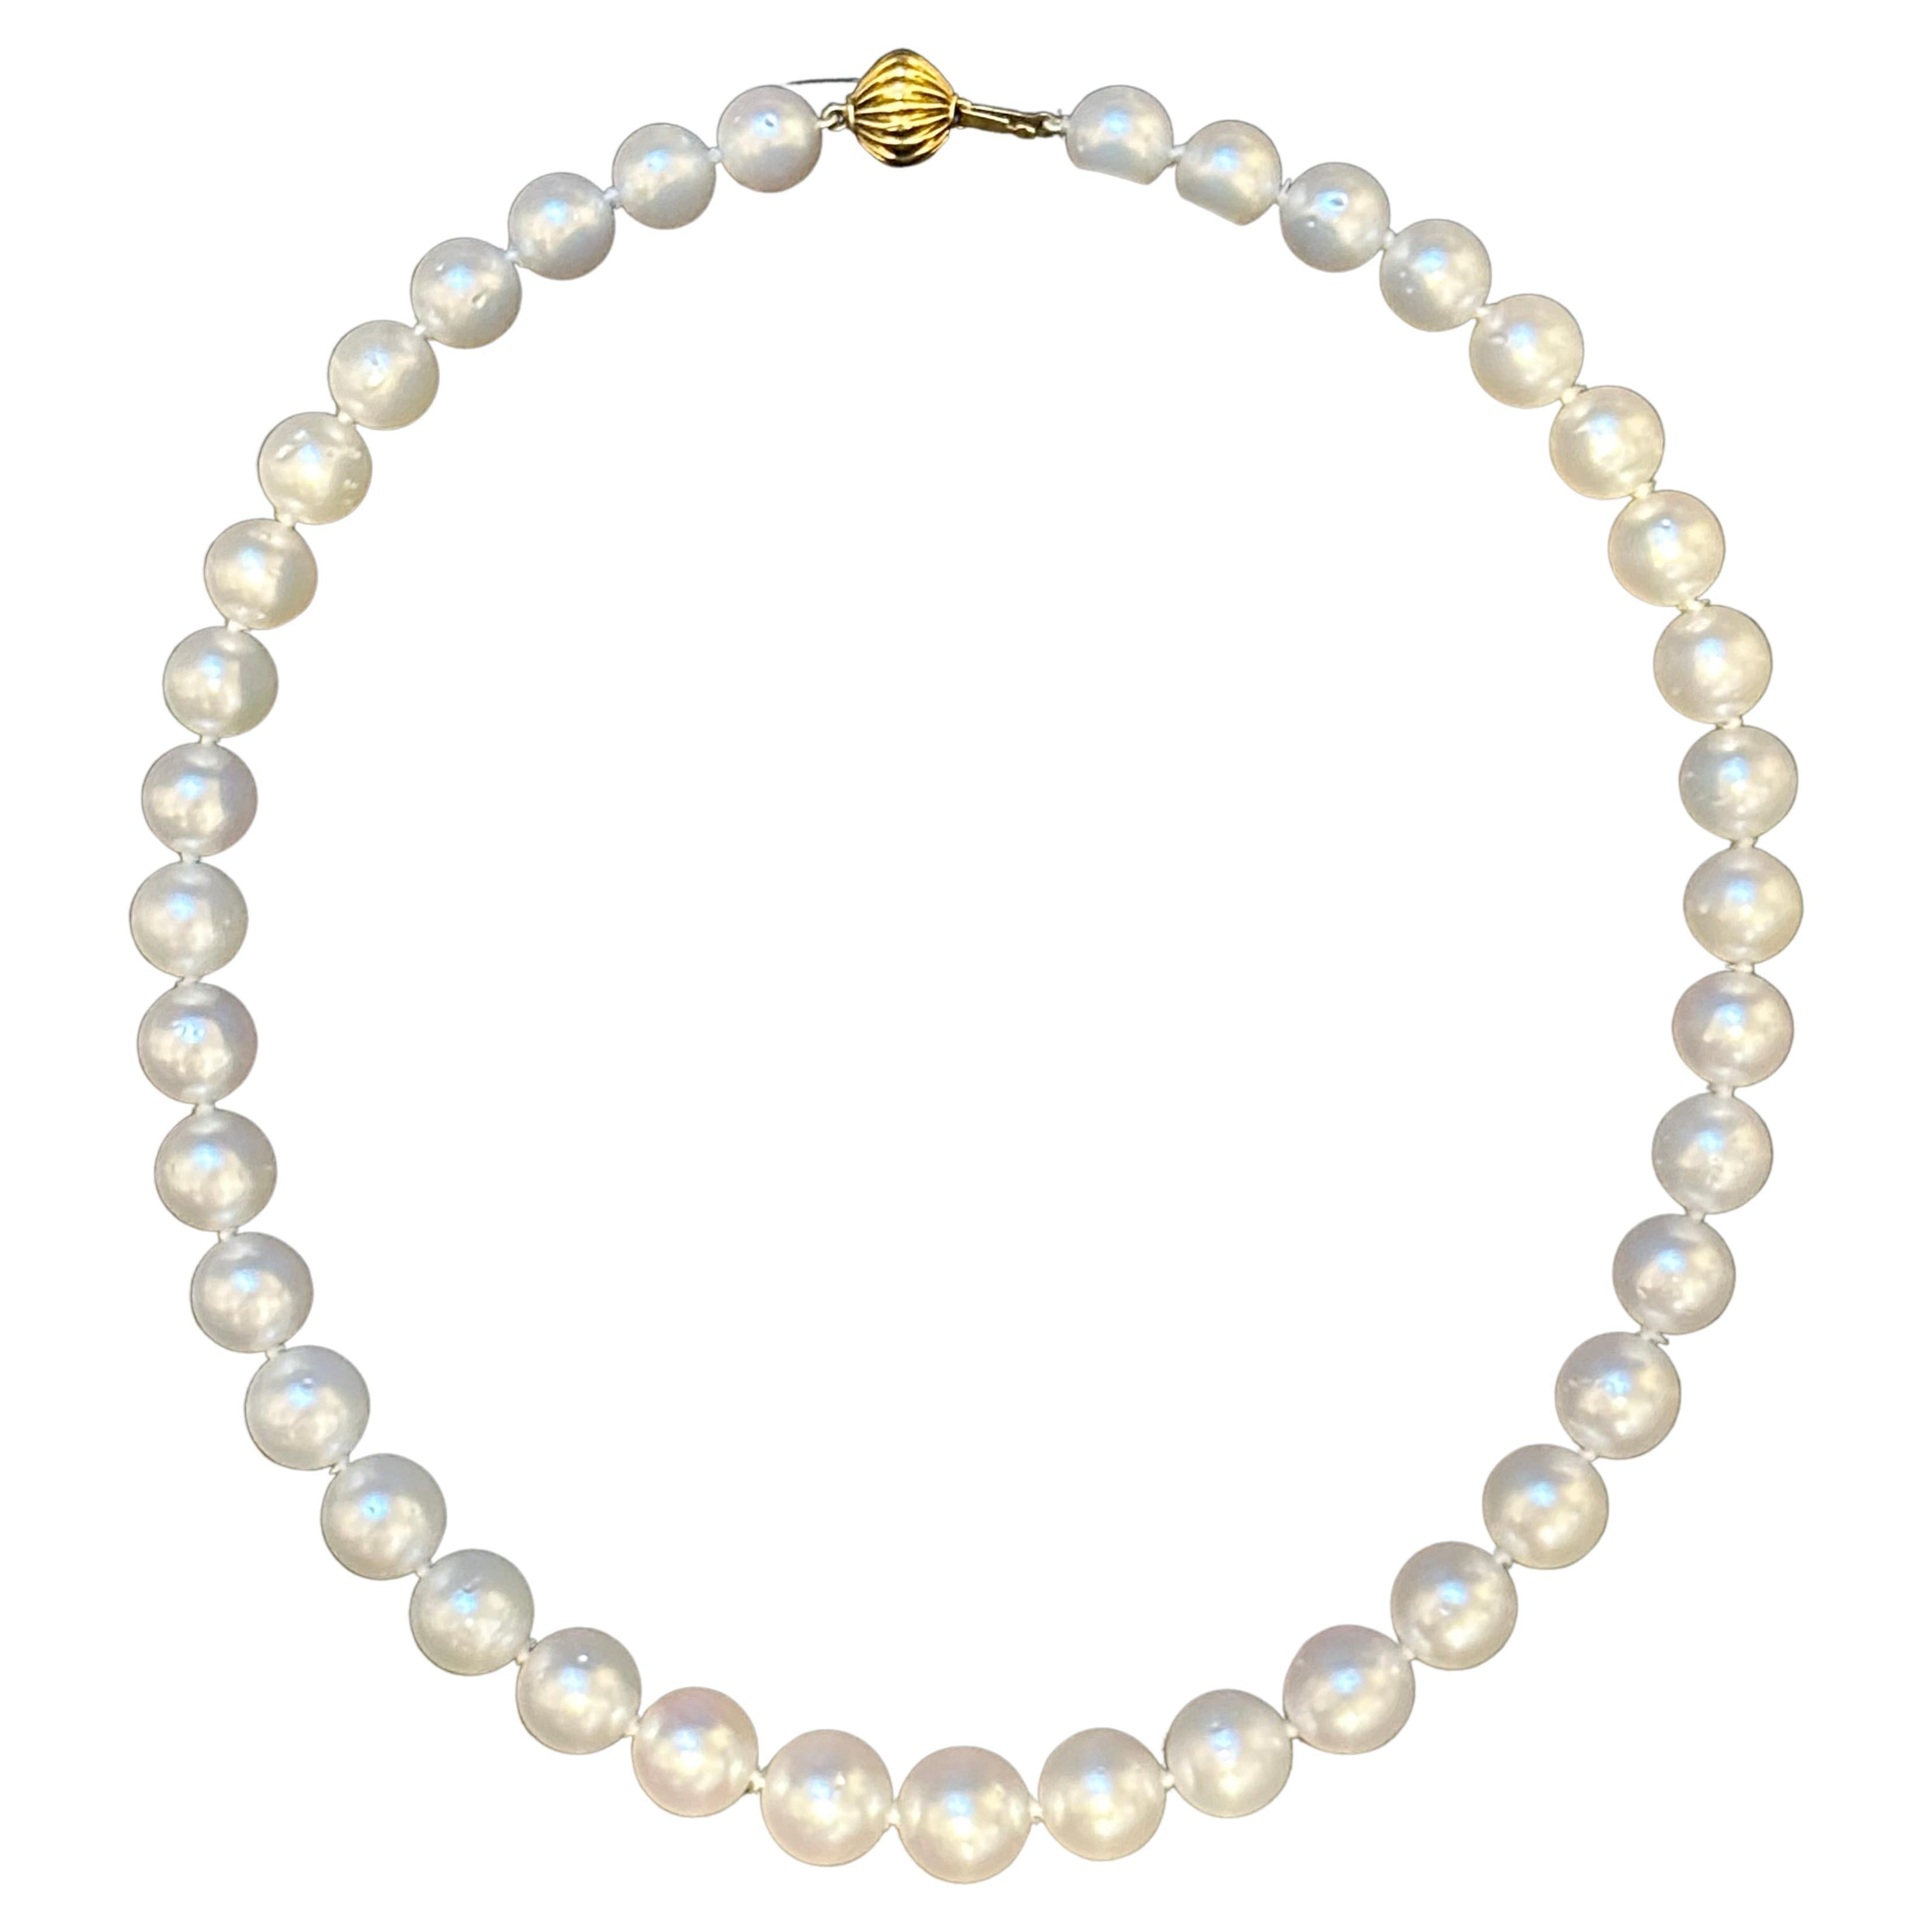 This 16-inch strand necklace features a collection of 39 exquisite white South Sea pearls, ranging from 9 to 12mm in size. The pearls are beautifully complemented by a white 14K yellow gold ball clasp, adding a touch of elegance. With a total weight